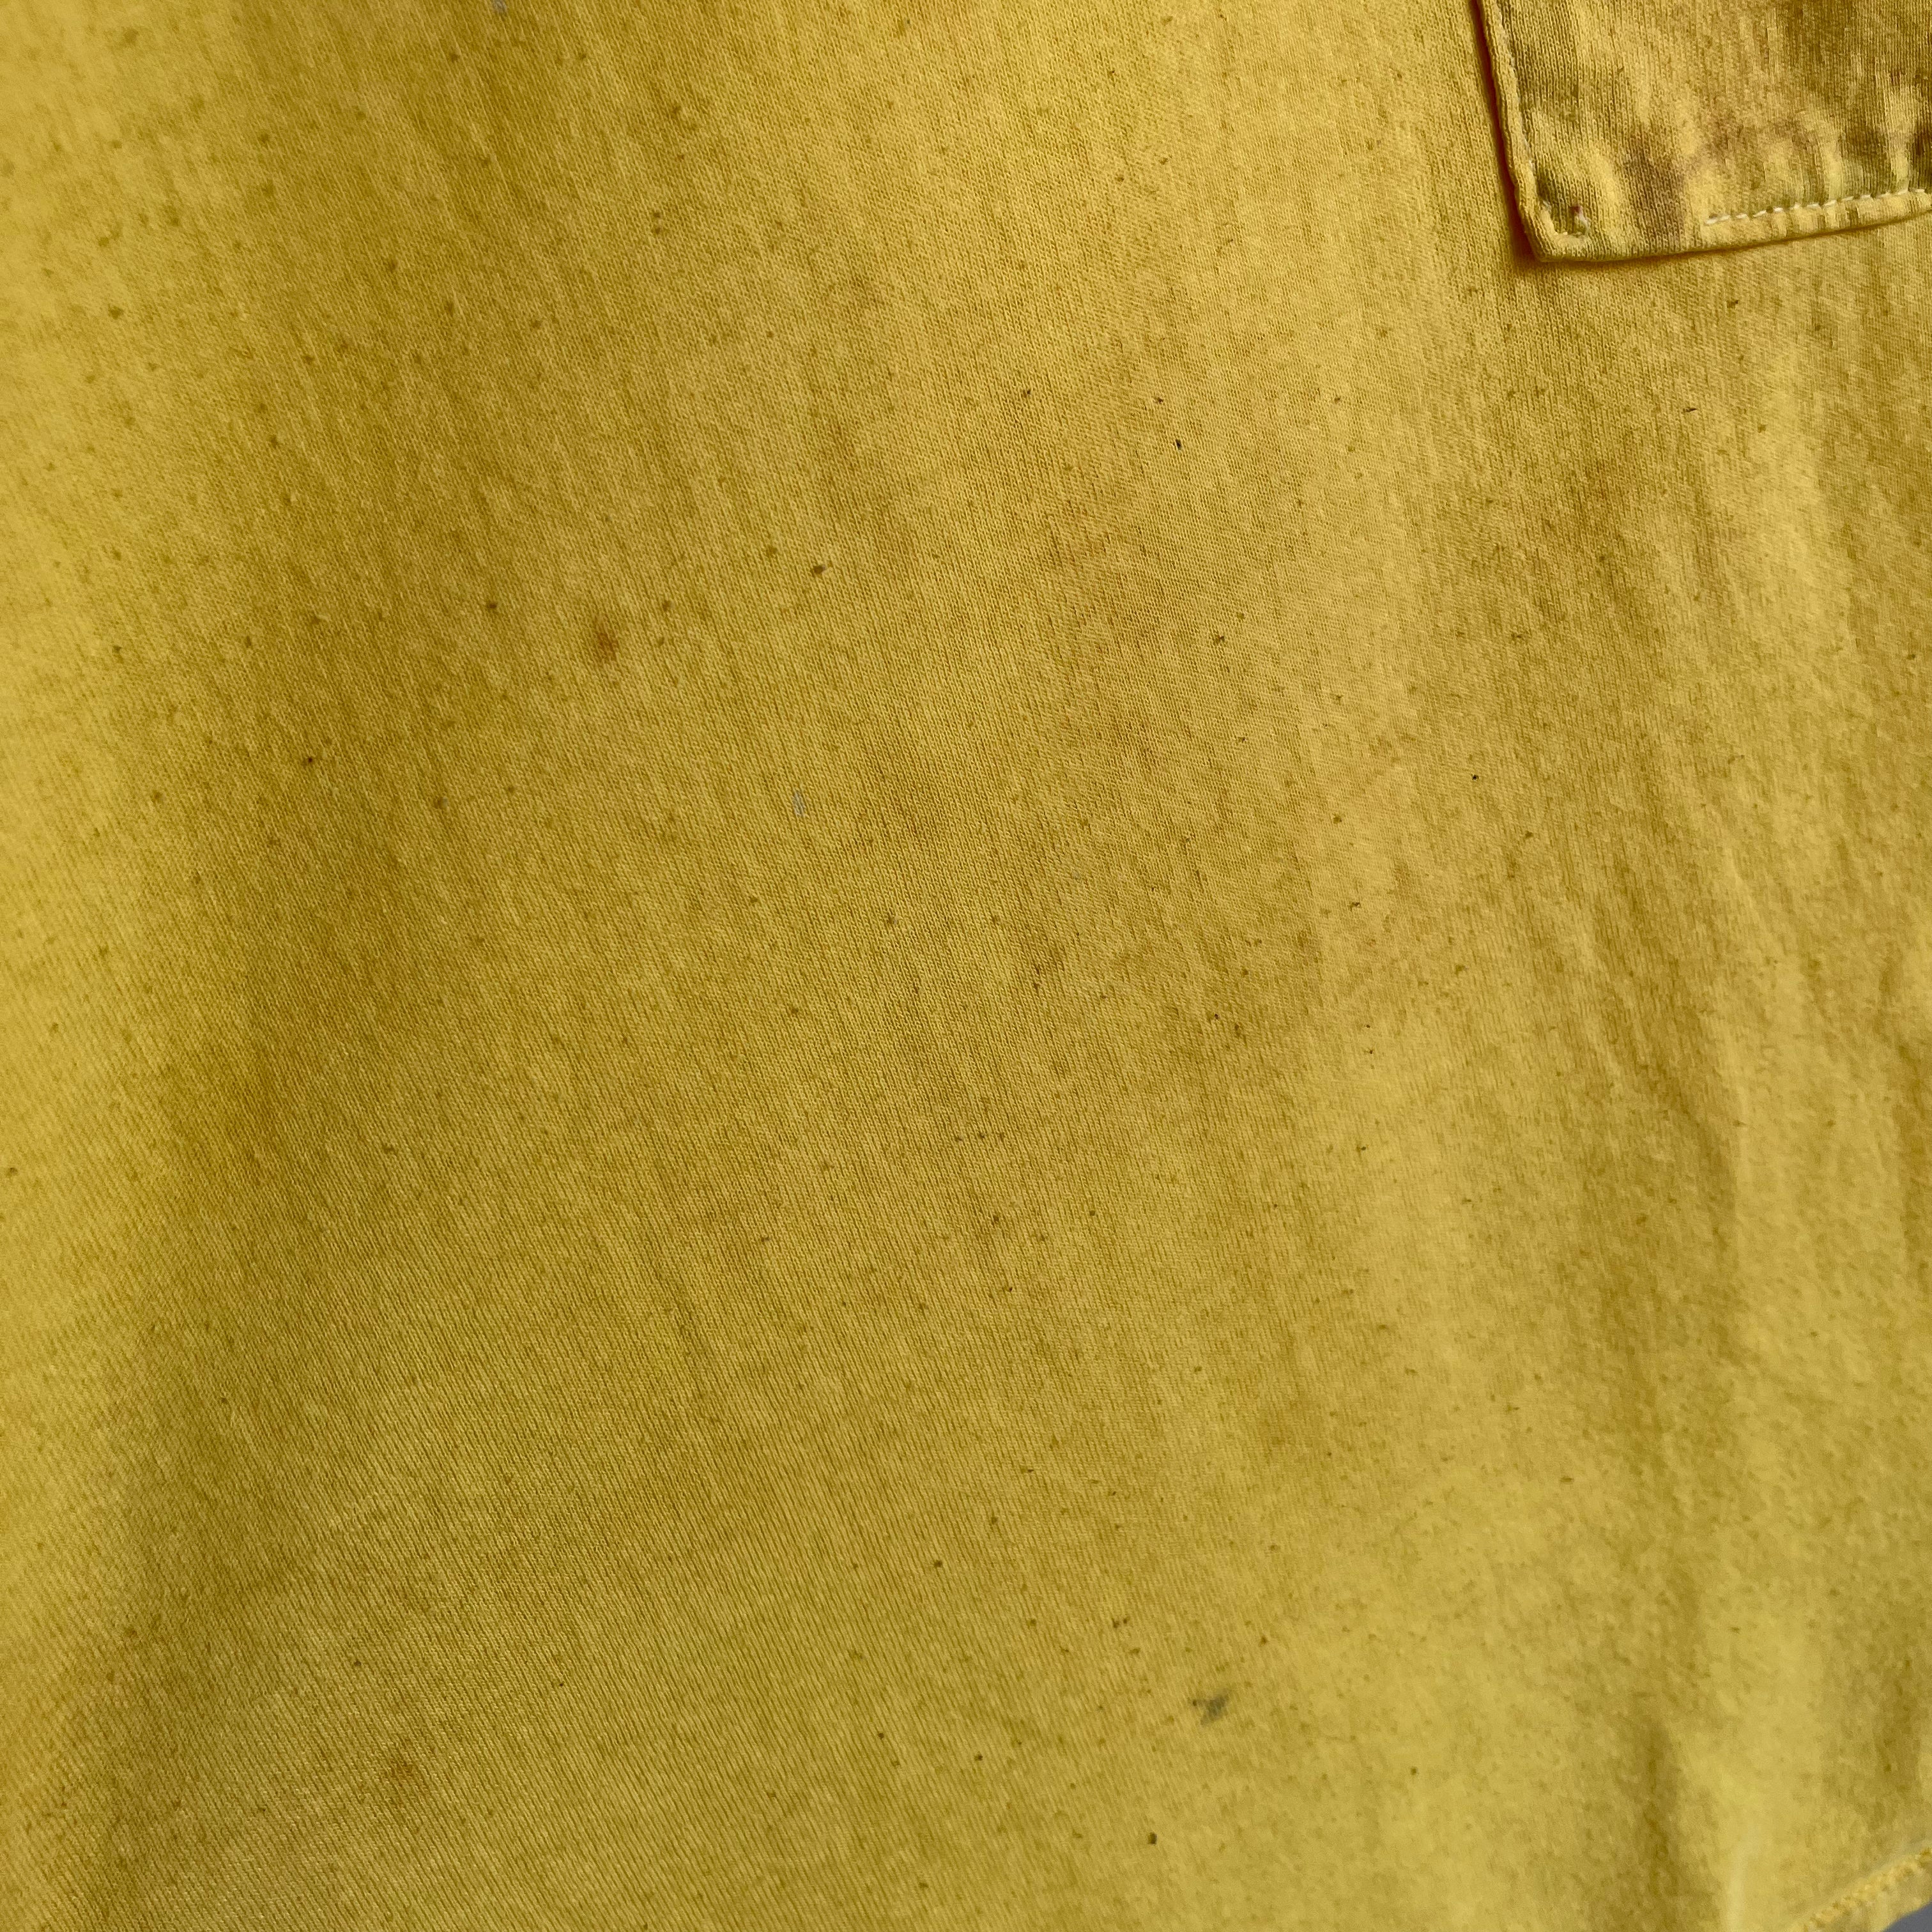 1980s Super Stained Pale Yellow Pocket T-Shirt